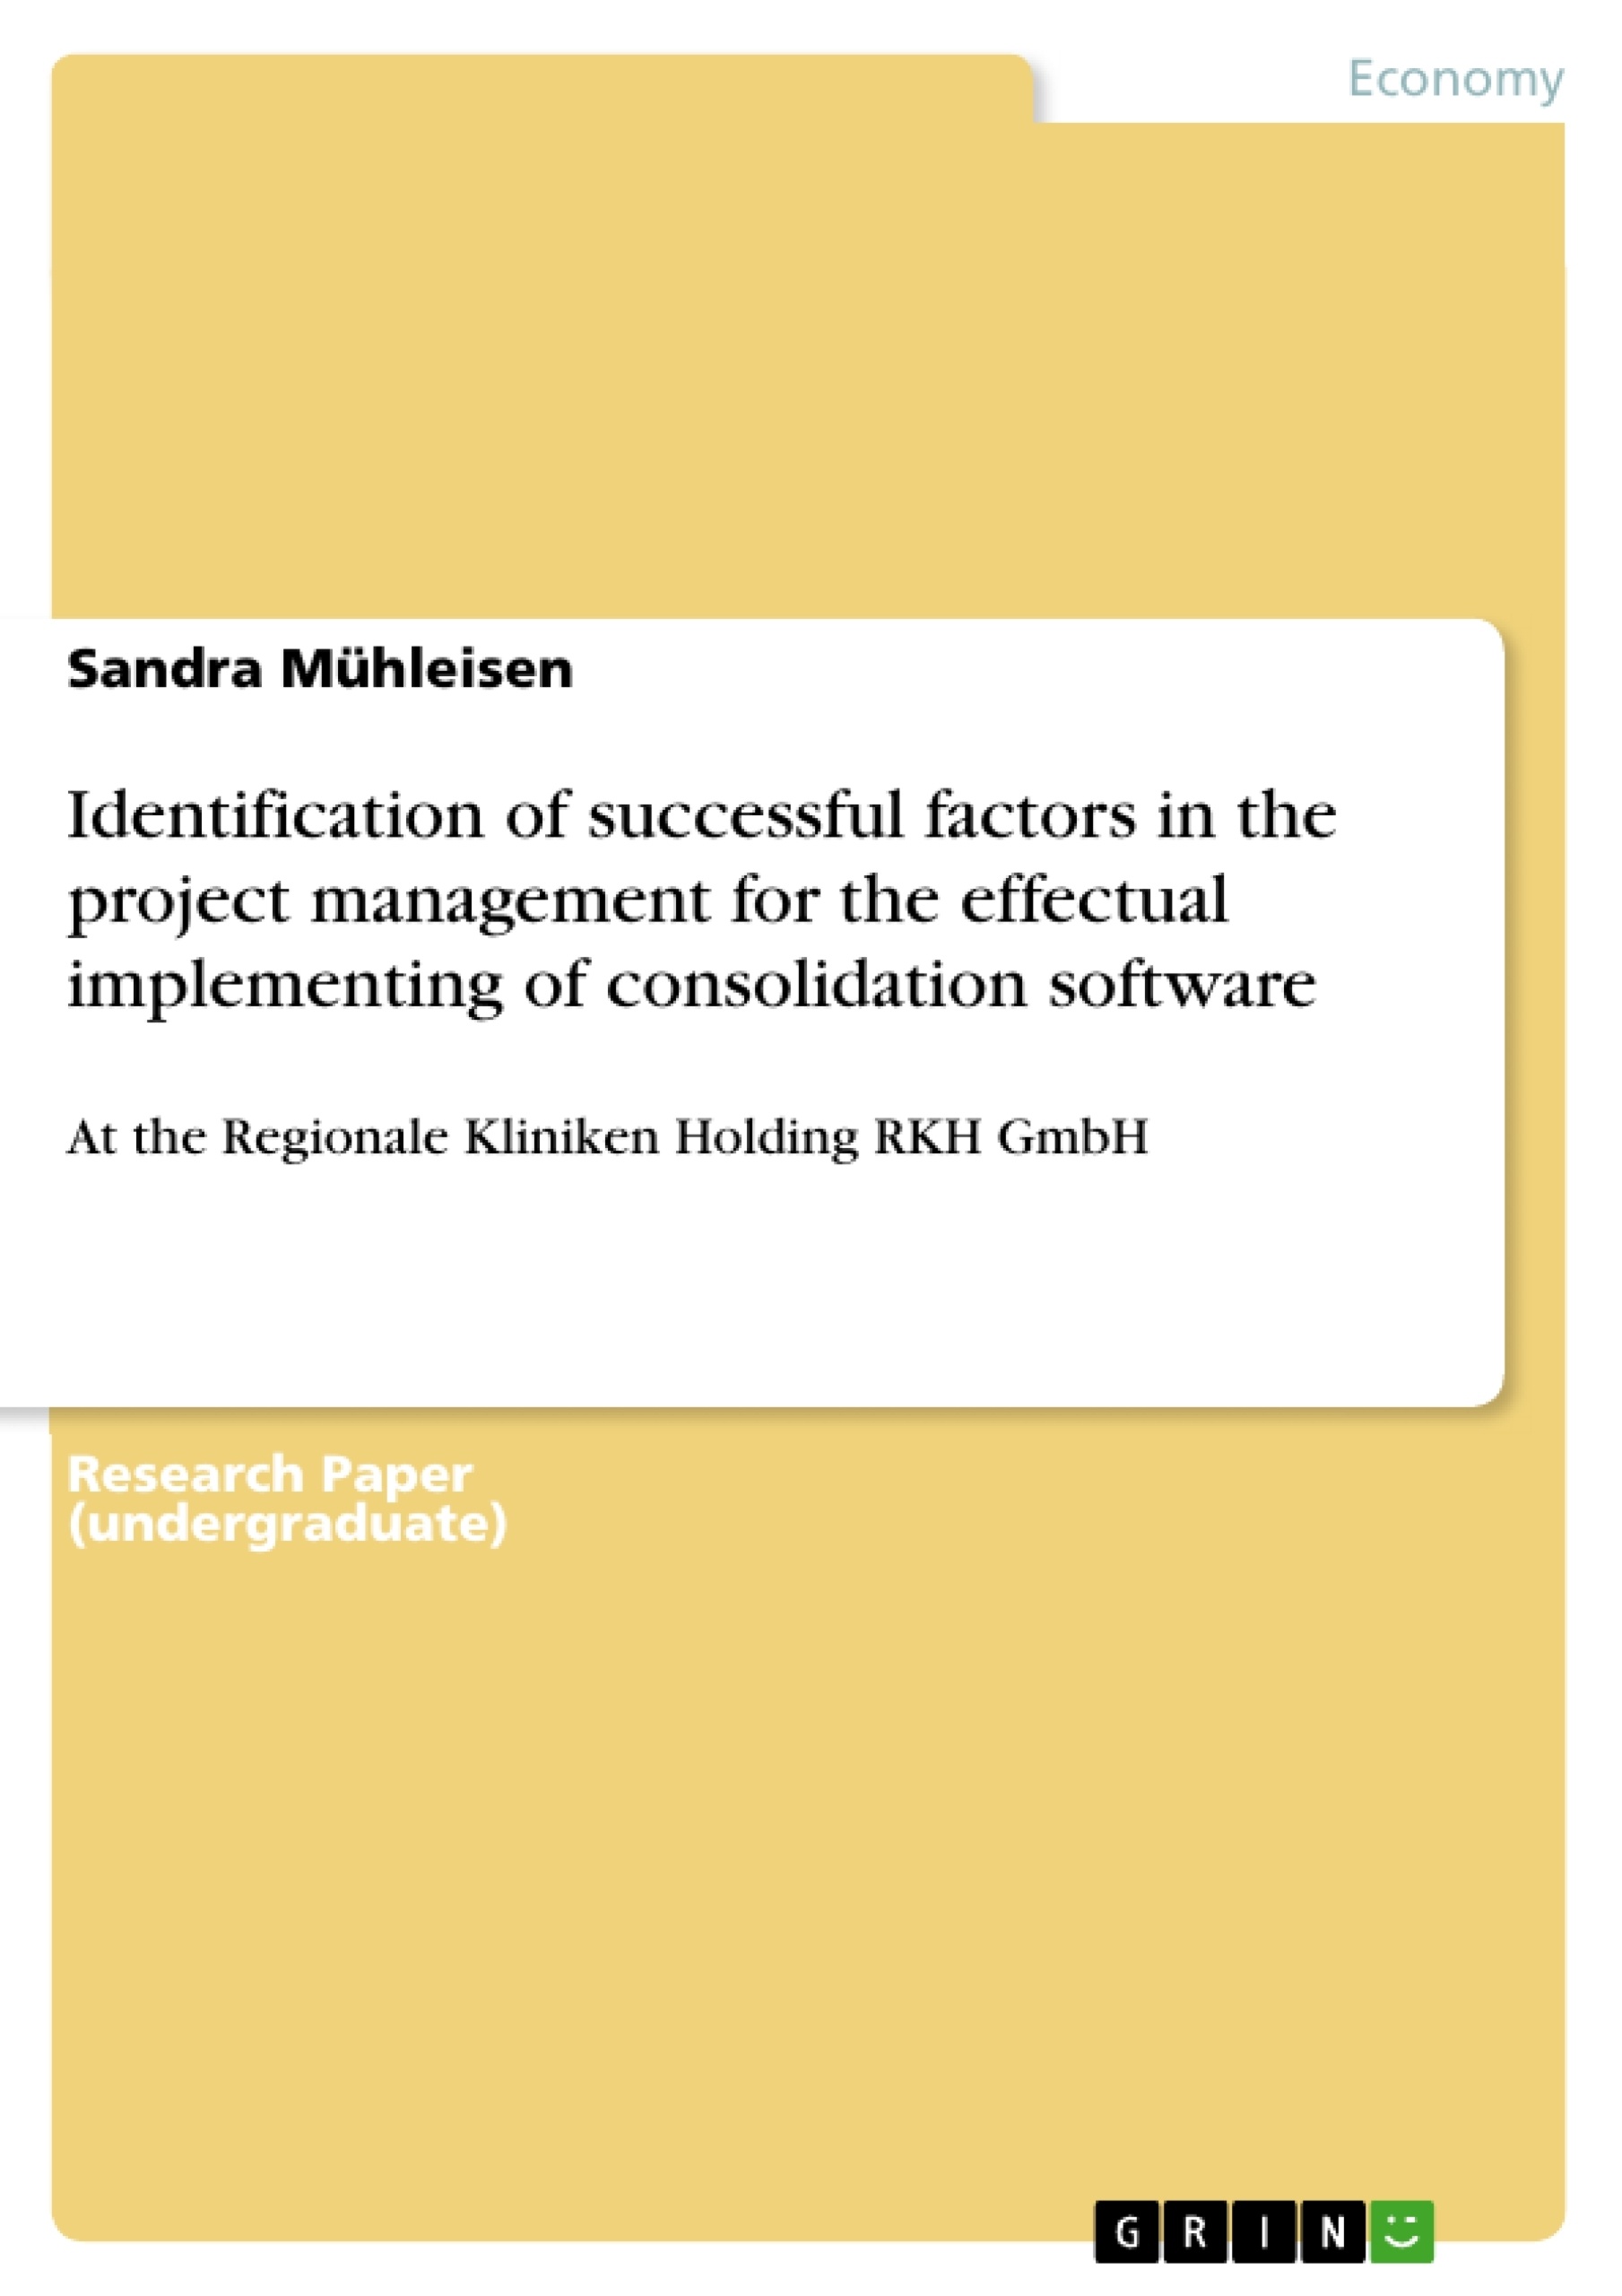 Titre: Identification of successful factors in the project management for the effectual implementing of consolidation software